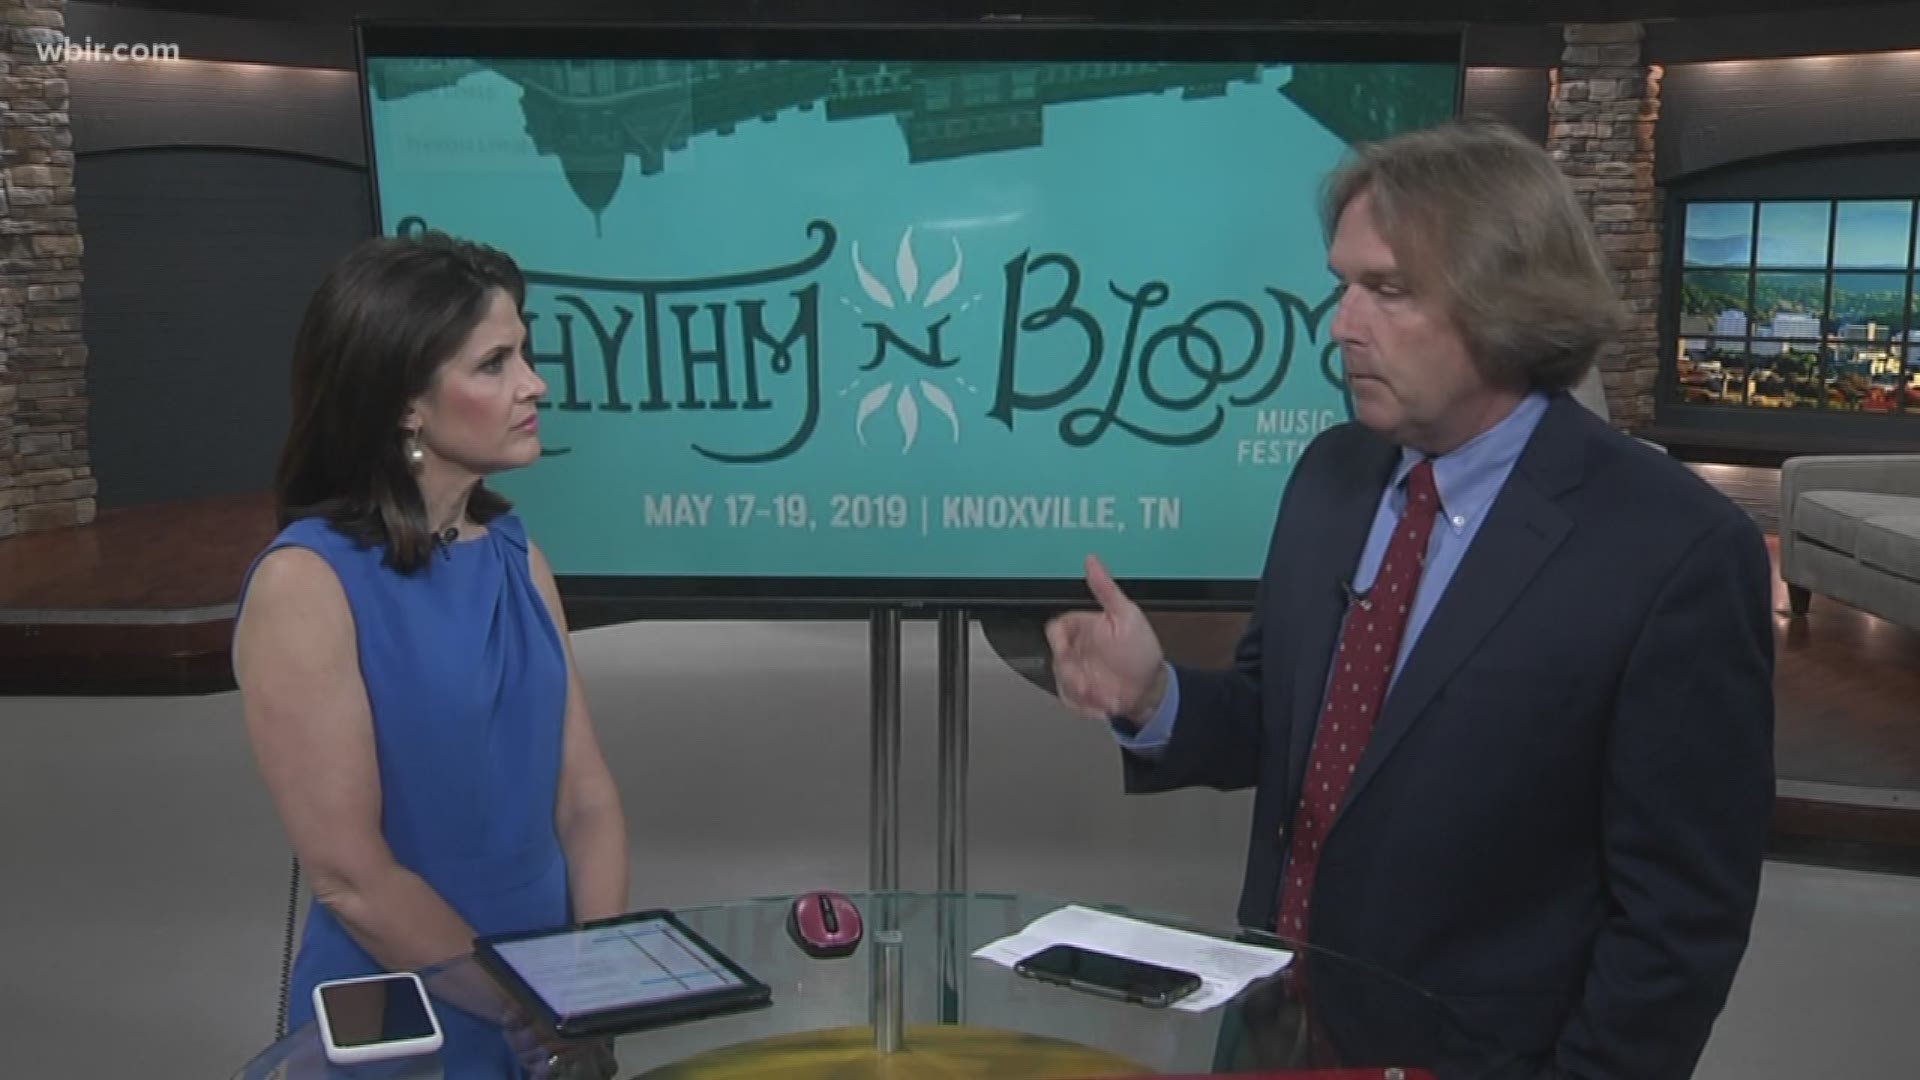 The Rhythm N' Blooms music festival literally has something for everyone. From musicians like Dawes, Tyler Childers, Tank & the Bangas, Gangstagrass and many more. There's also a free music stage and market street fair on Jackson Avenue. Visit rhythmnbloomsfest.com for more information. May 15, 2019-4pm.